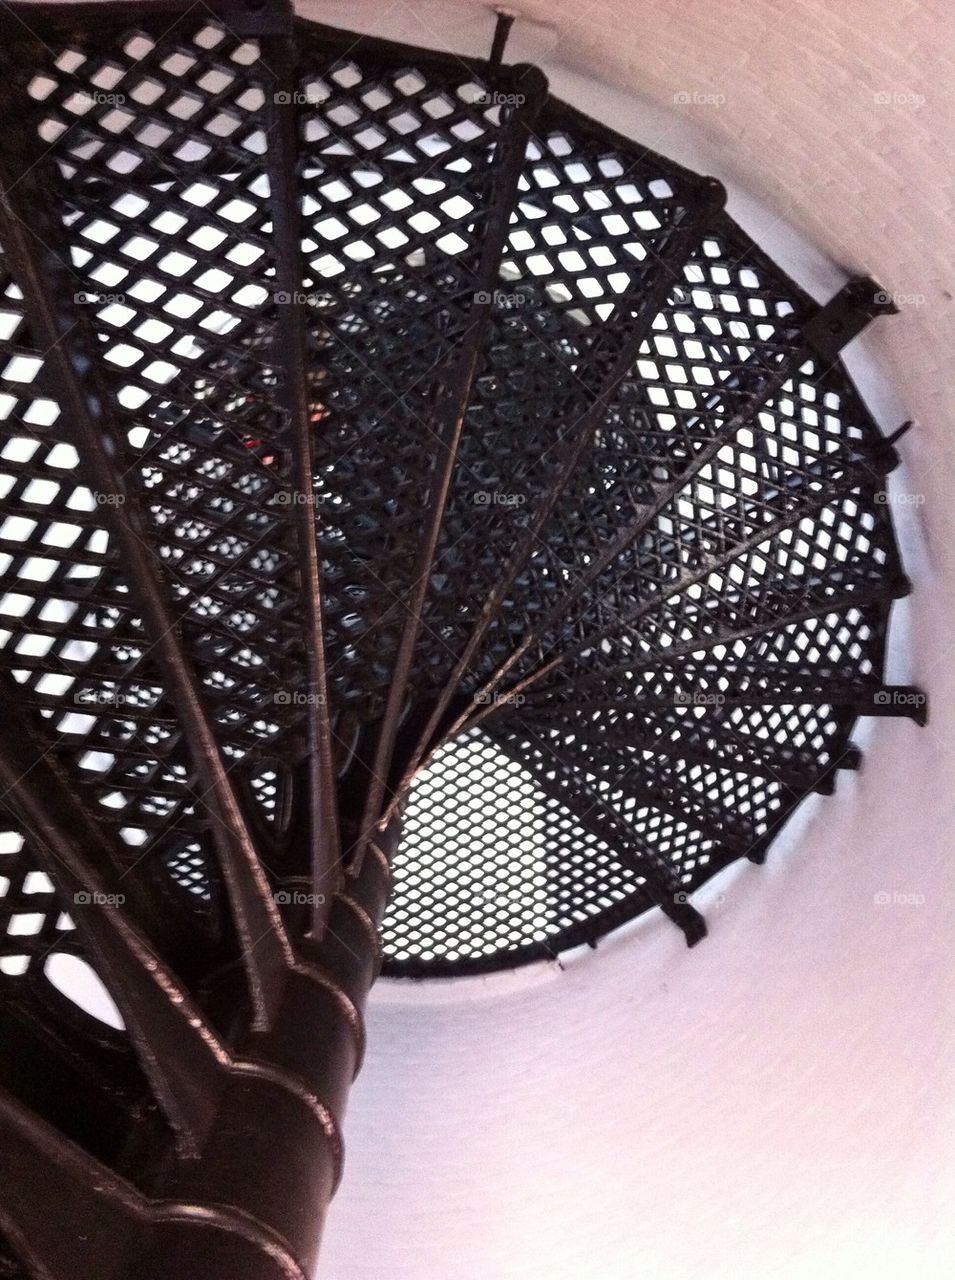 Stair case at lighthouse 